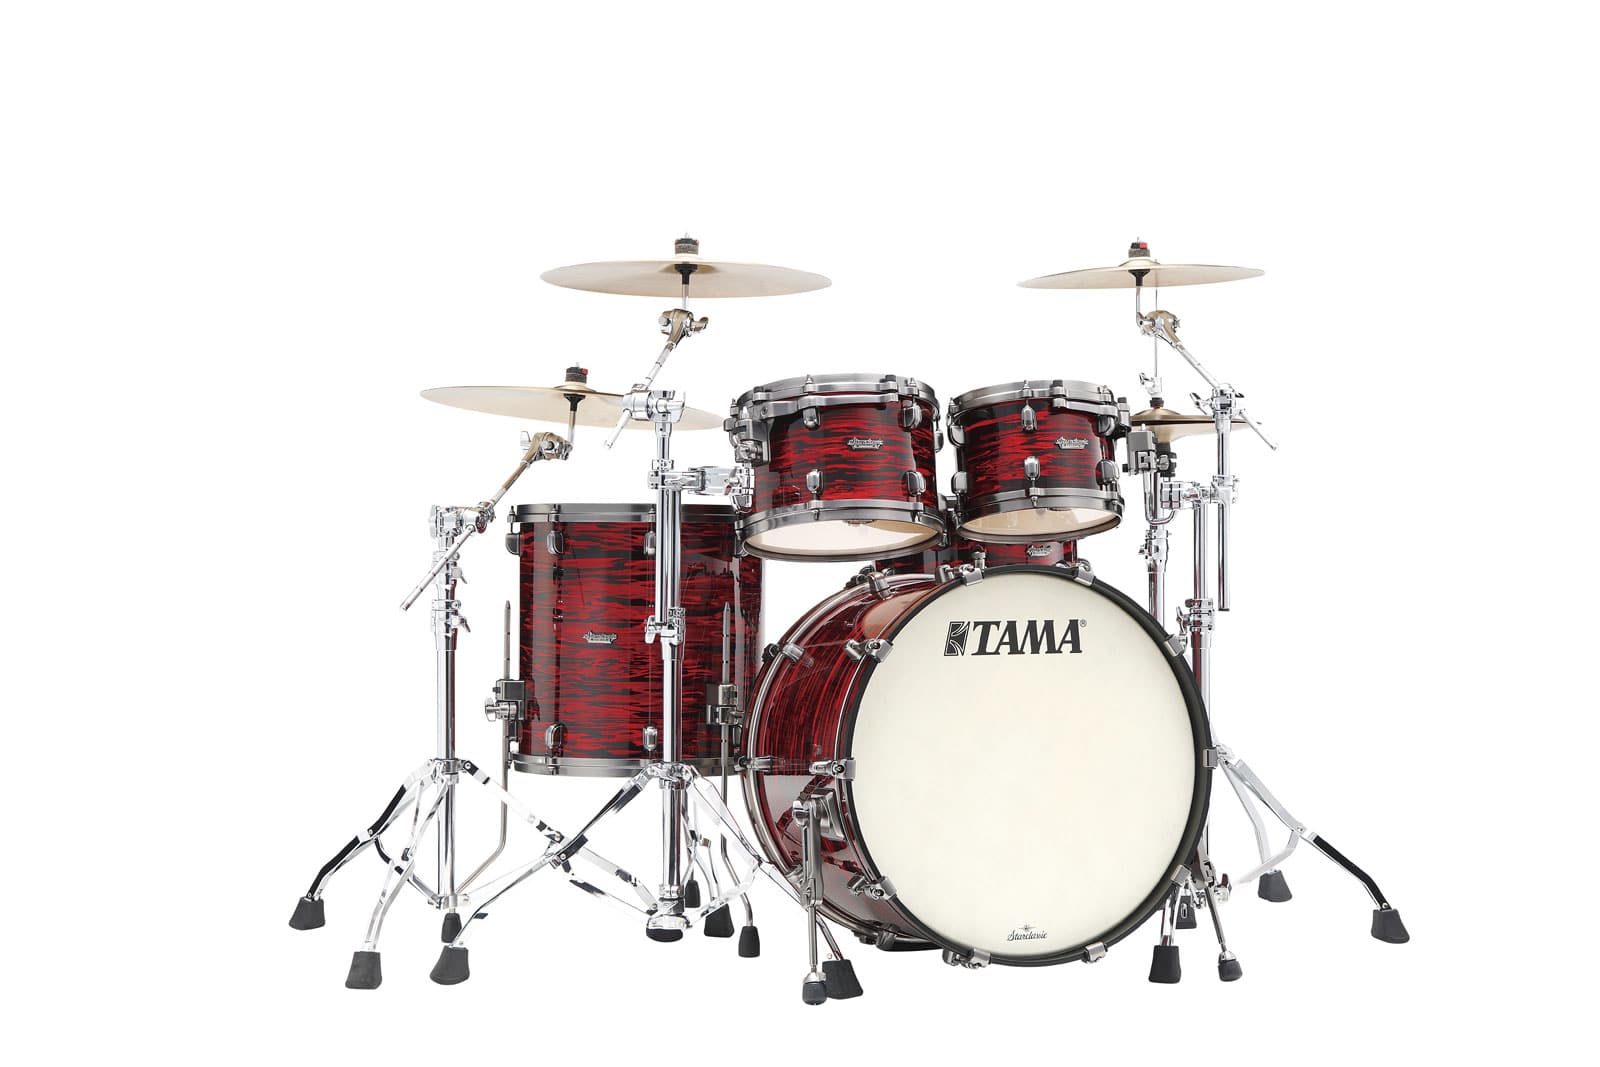 TAMA STARCLASSIC MAPLE STAGE 22 SMOKED BLACK NICKEL / RED OYSTER